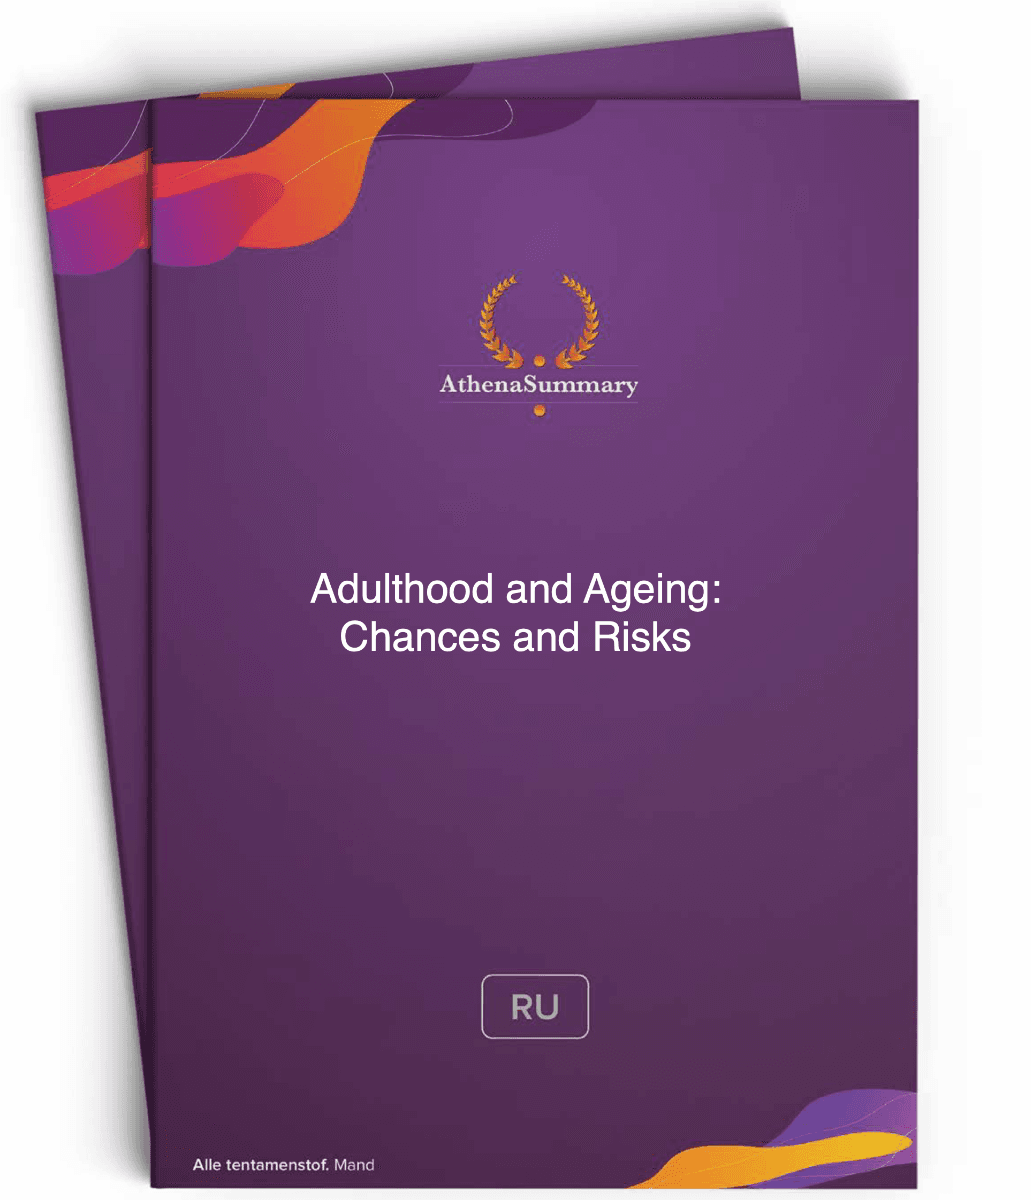 Literature summary - Adulthood and Ageing: Chances and Risks [2022-2023]